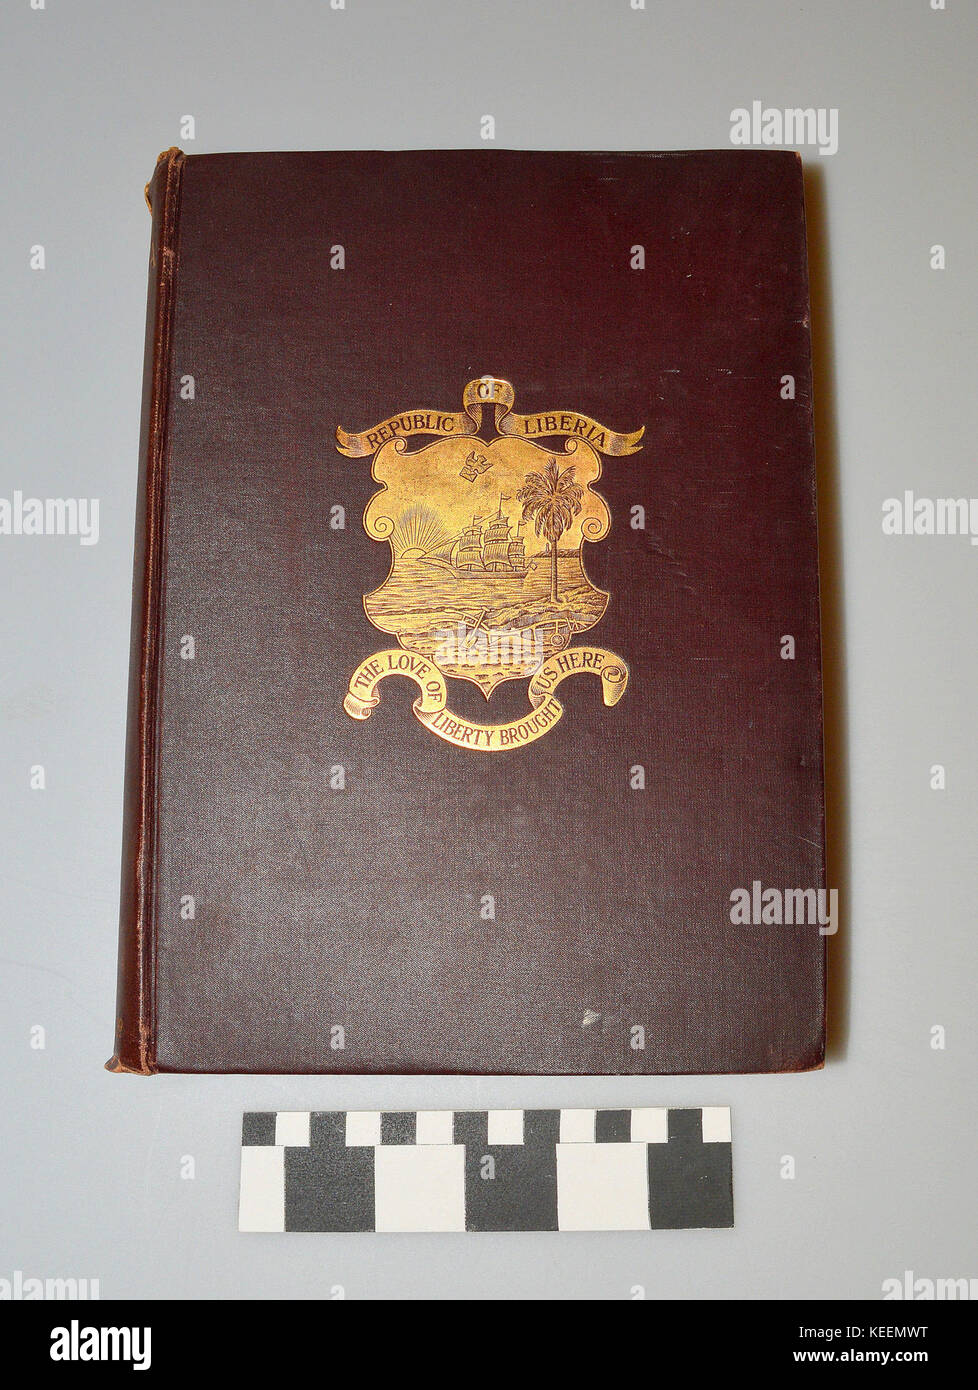 Liberia, Volume I  By Sir Harry Johnston, G.C.M.G., K.C.B., With Perkins' Library Lending Card And Original Holder Stock Photo